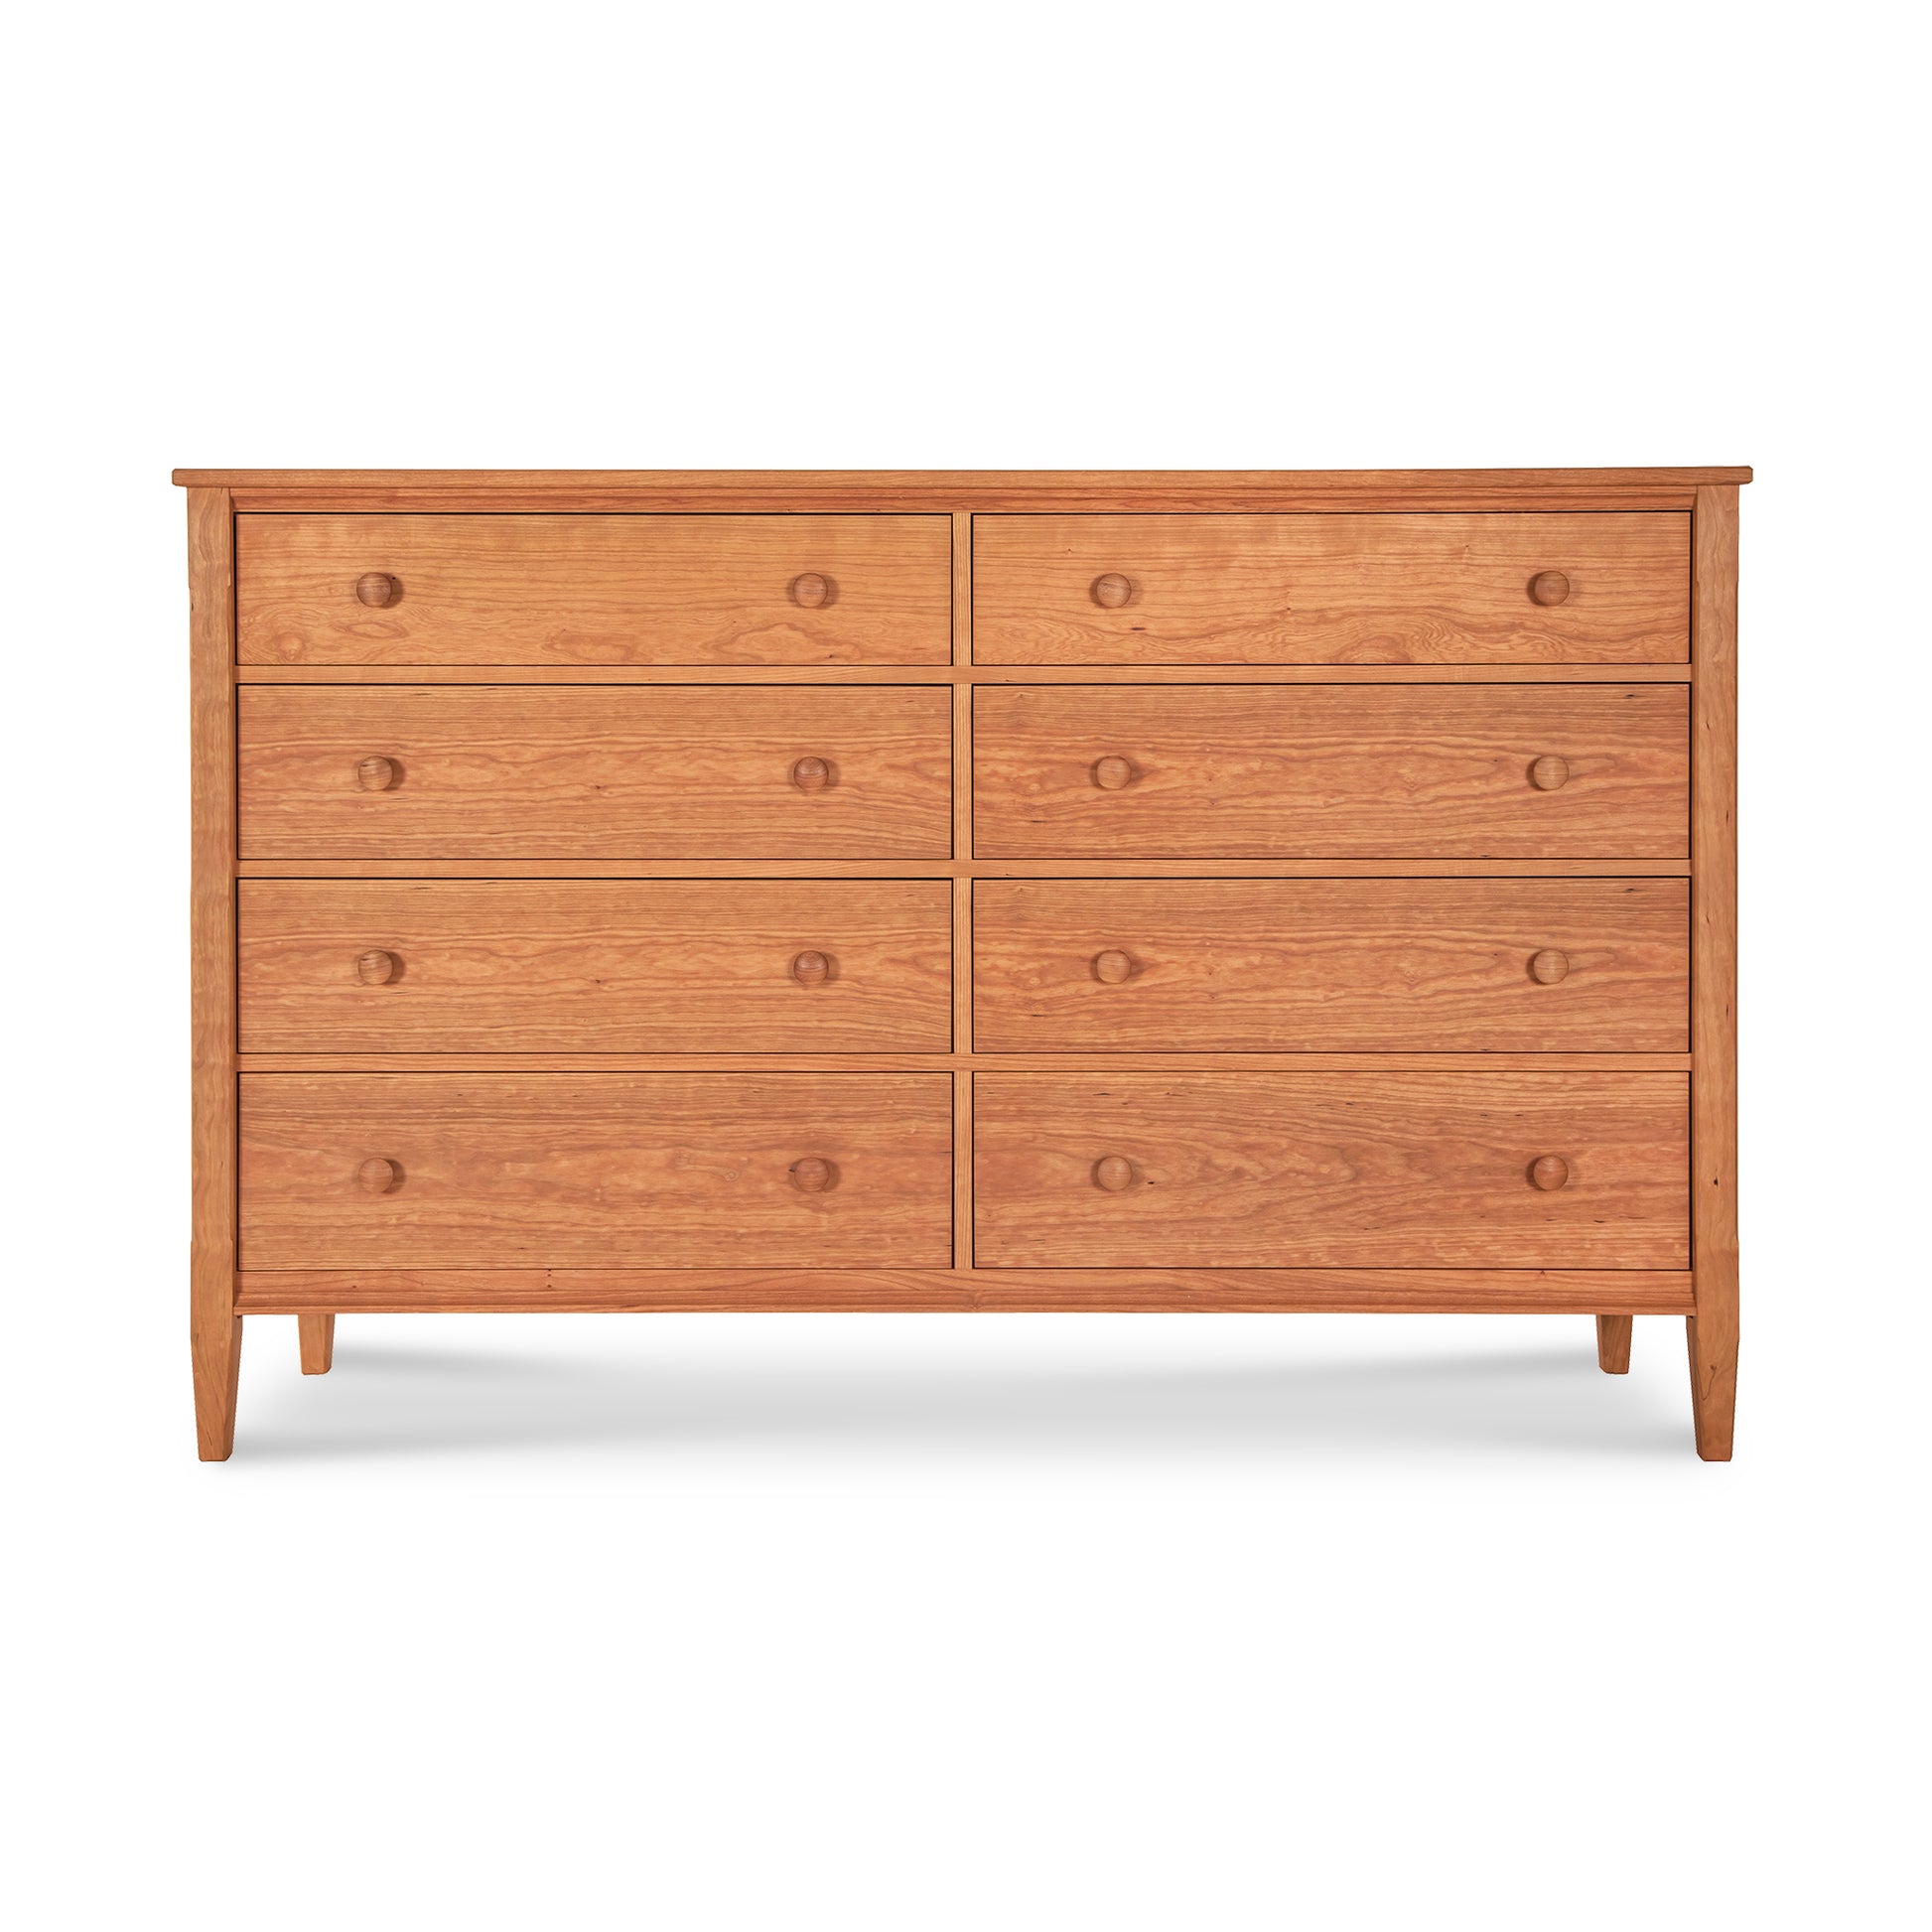 A Maple Corner Woodworks Vermont Shaker 8-Drawer Dresser, crafted from solid hardwoods, featuring a simple, traditional design with round handles, set against a plain white background.